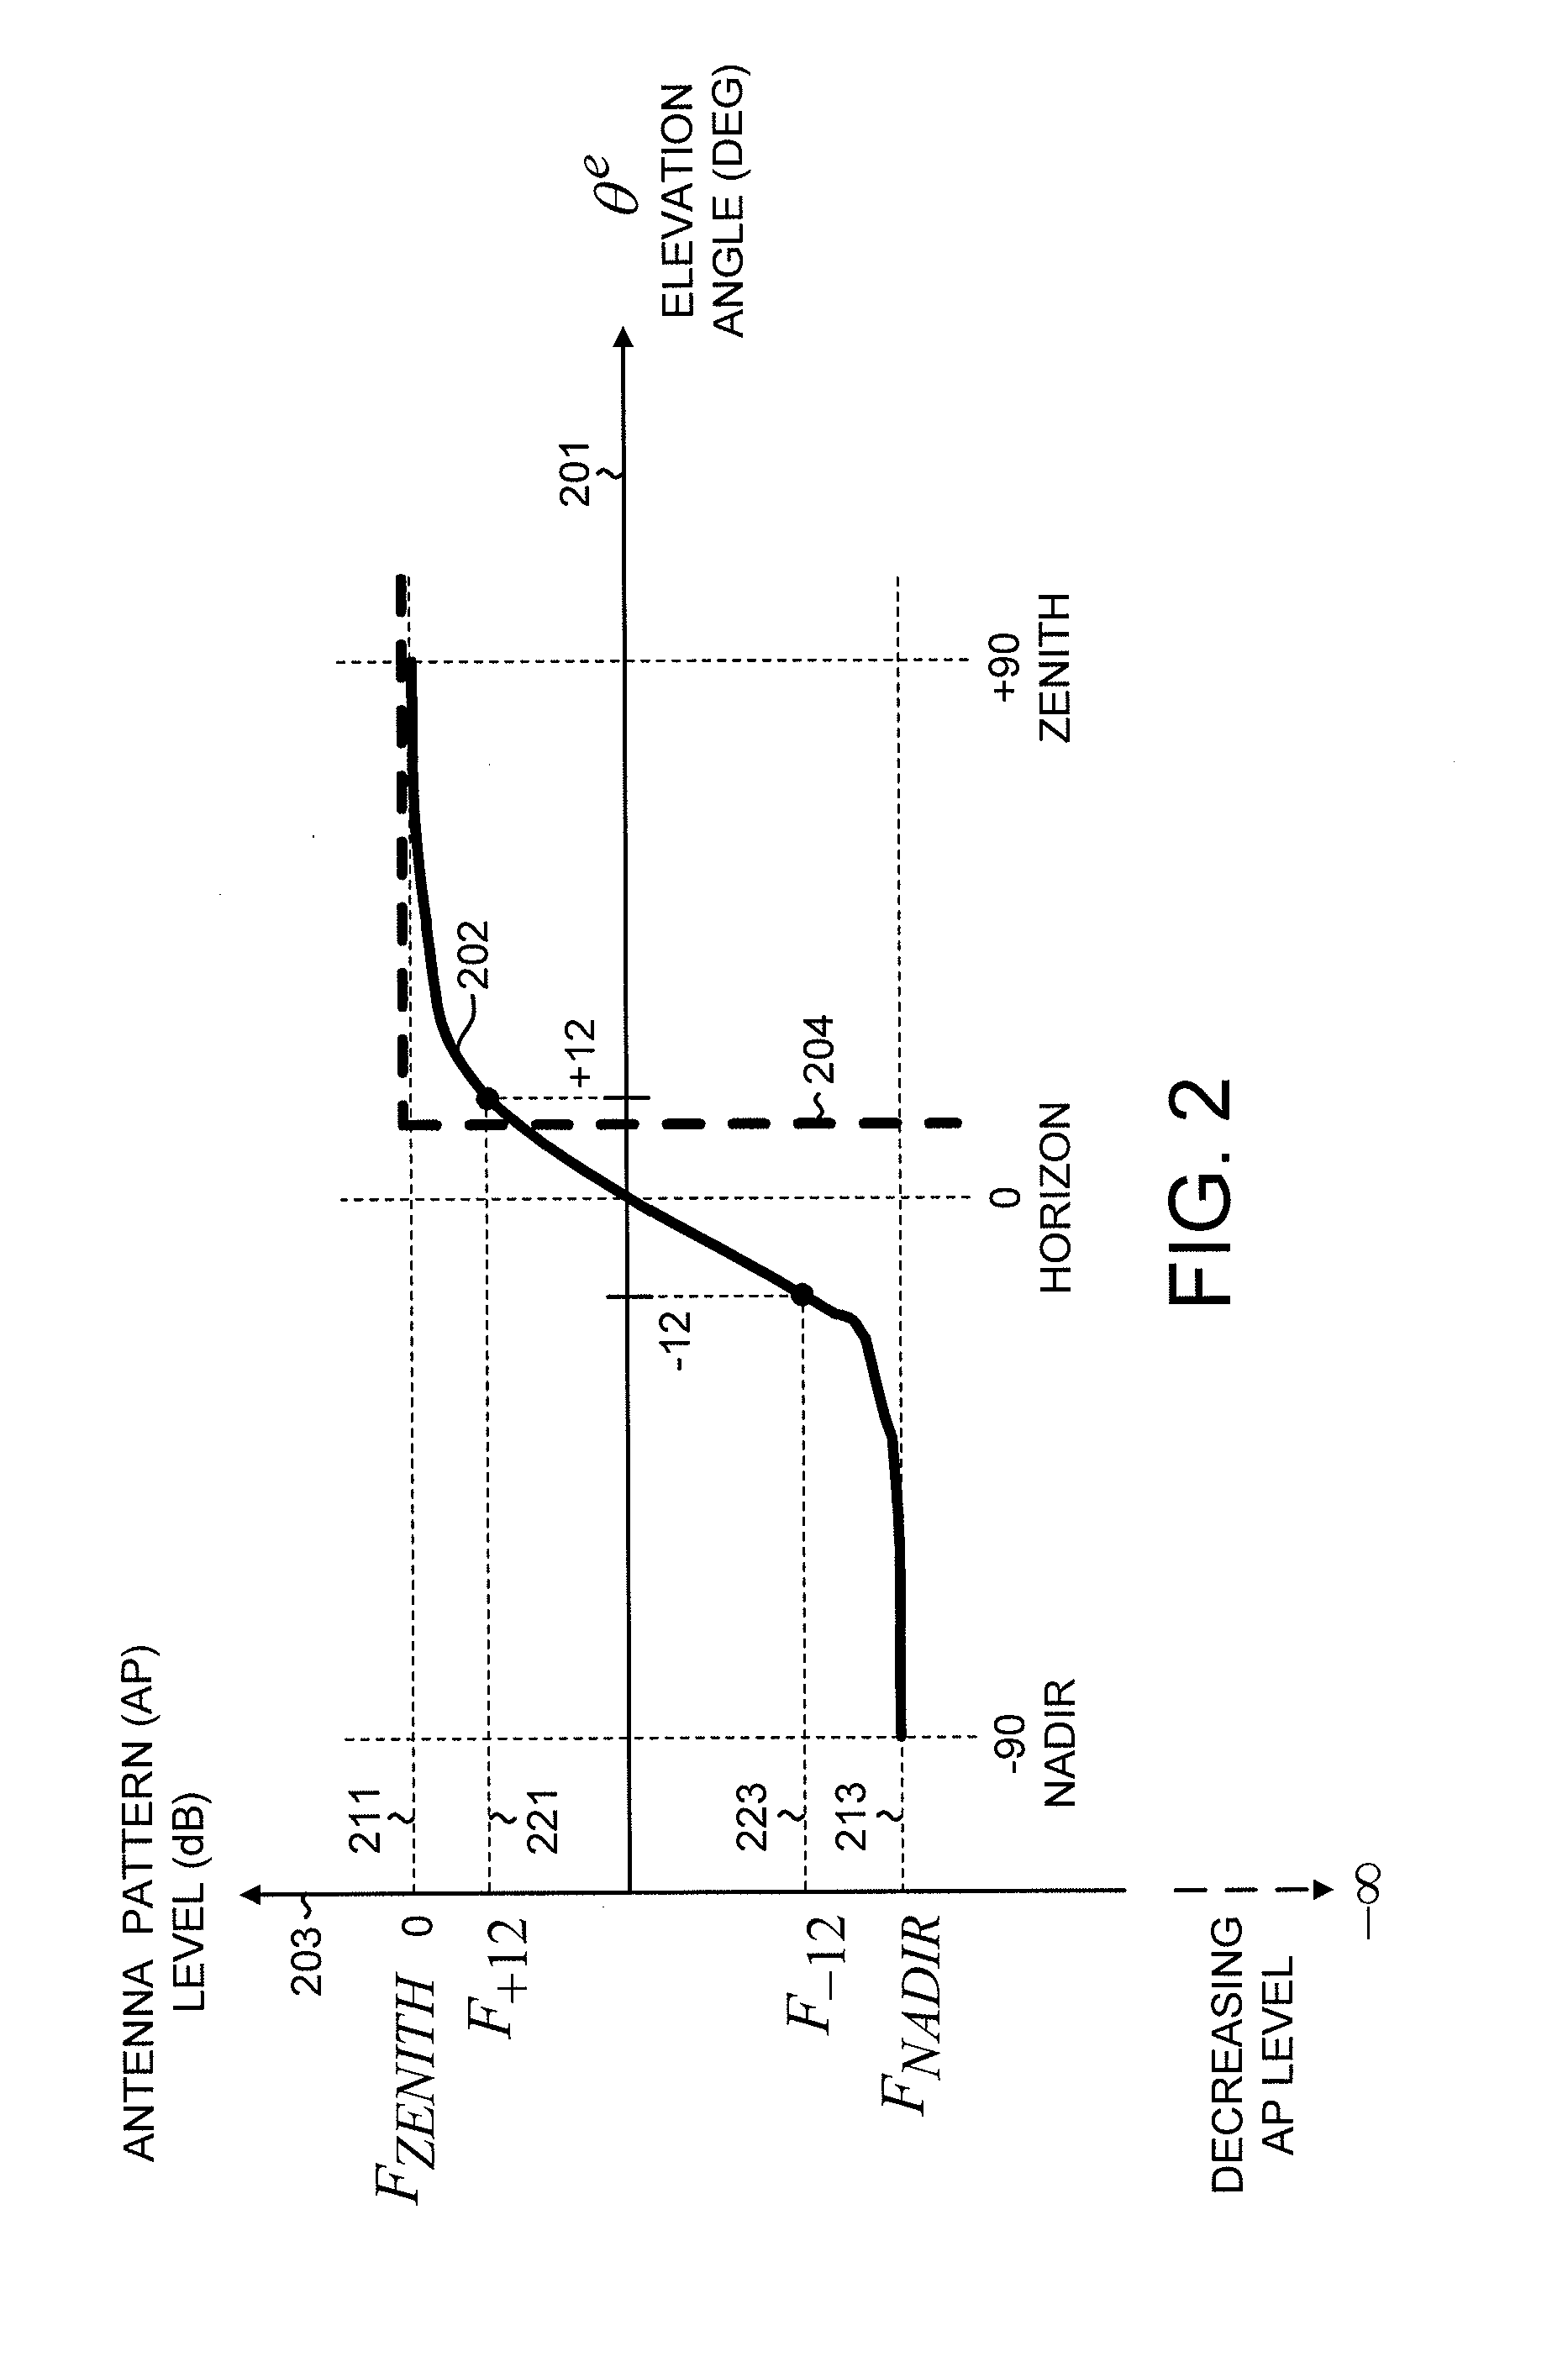 Ground Planes for Reducing Multipath Reception by Antennas